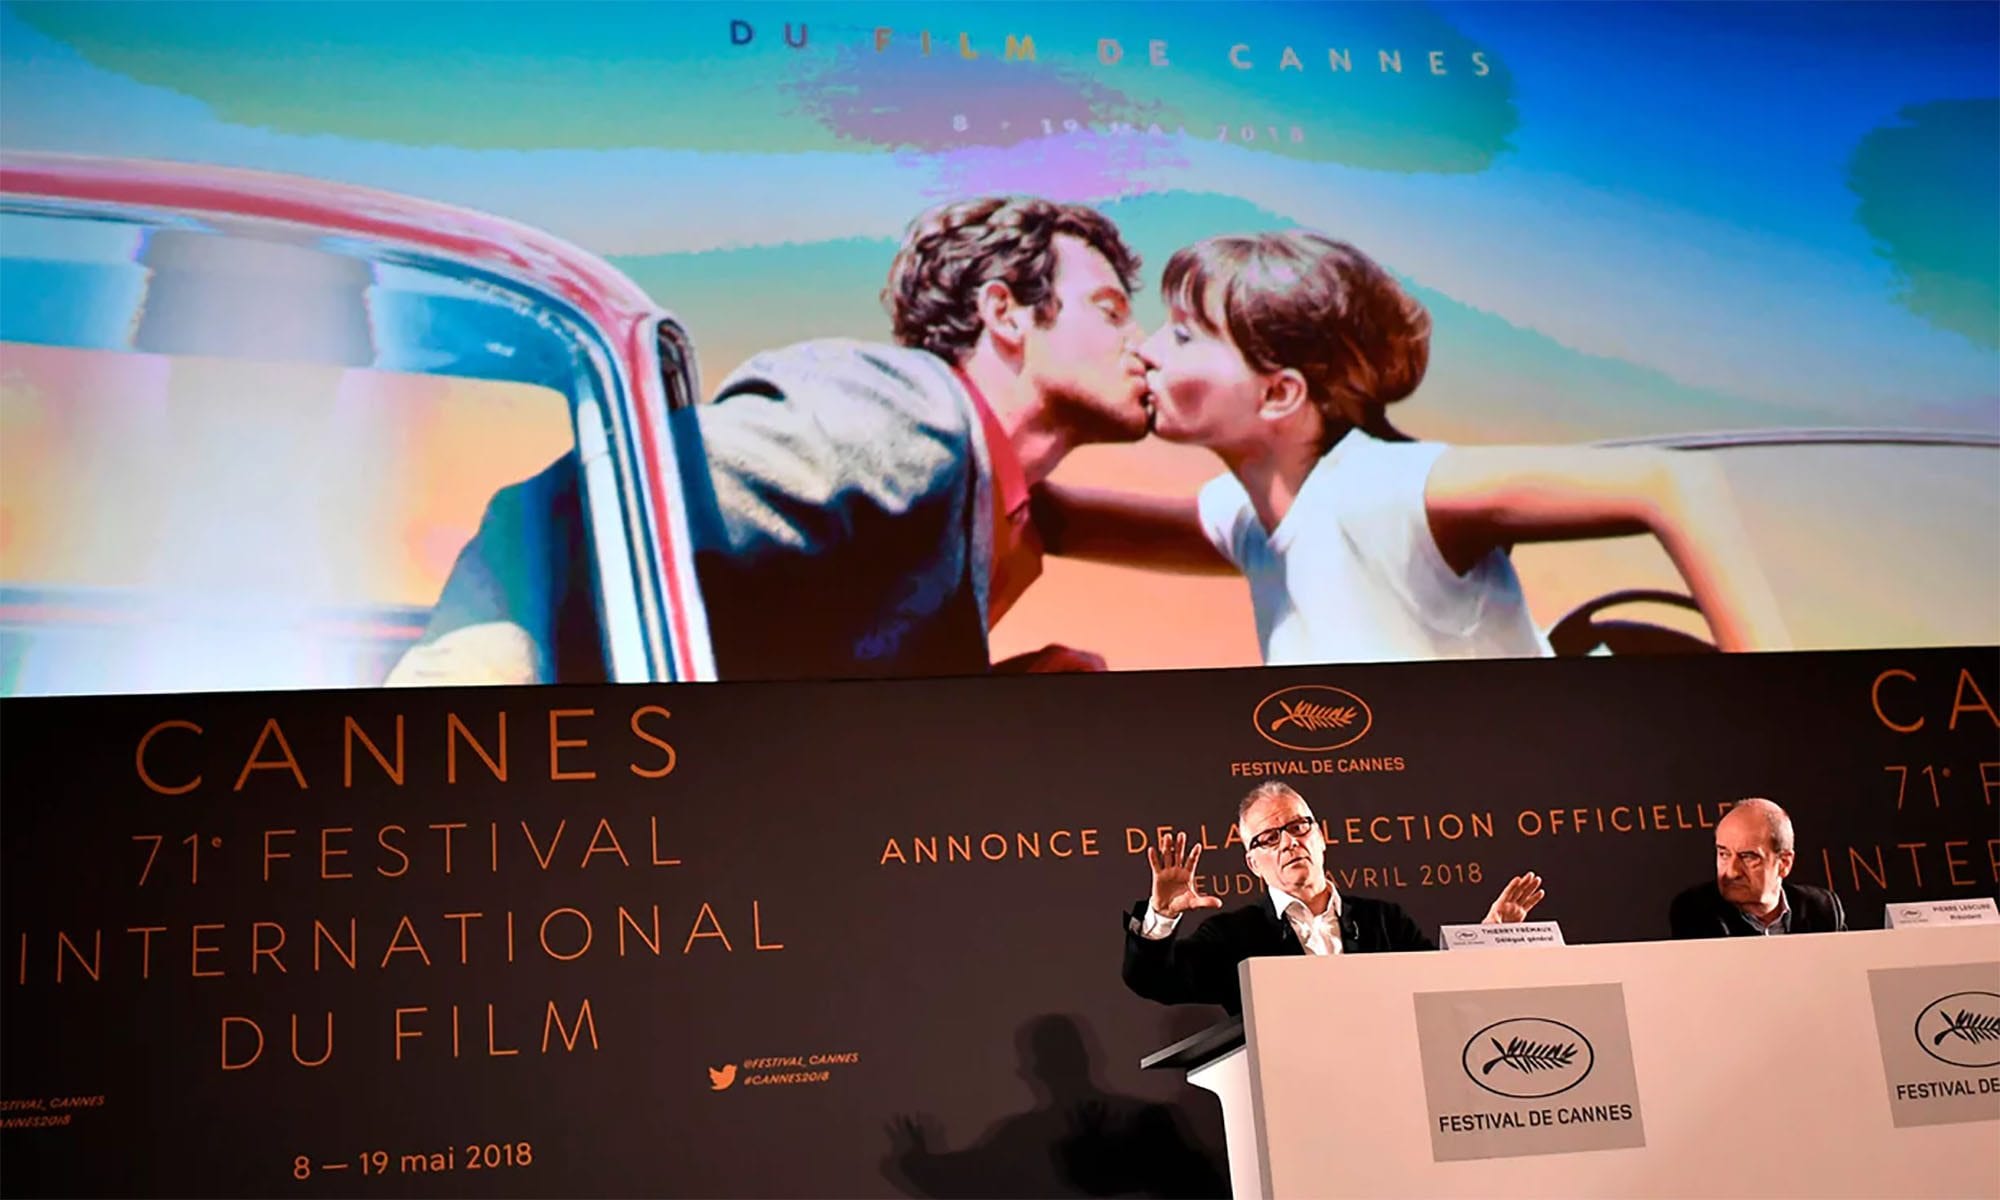 While the Cannes Film Festival is considered the most prestigious festival in the world, perhaps this year has proved the old formula isn’t working.